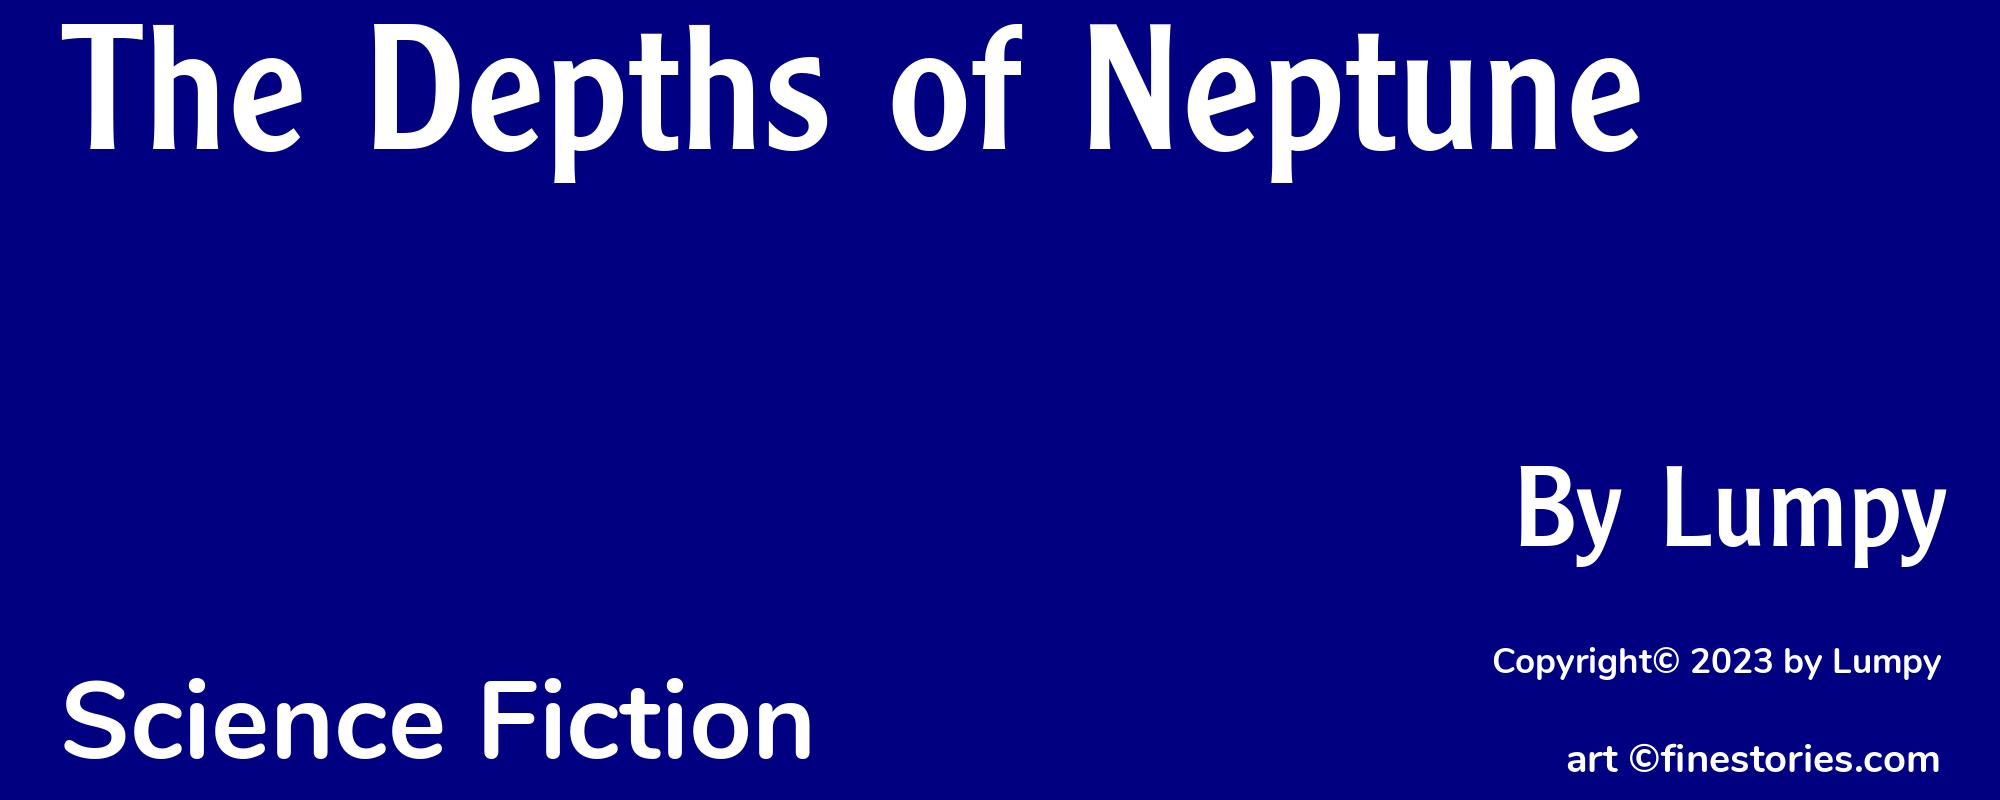 The Depths of Neptune - Cover